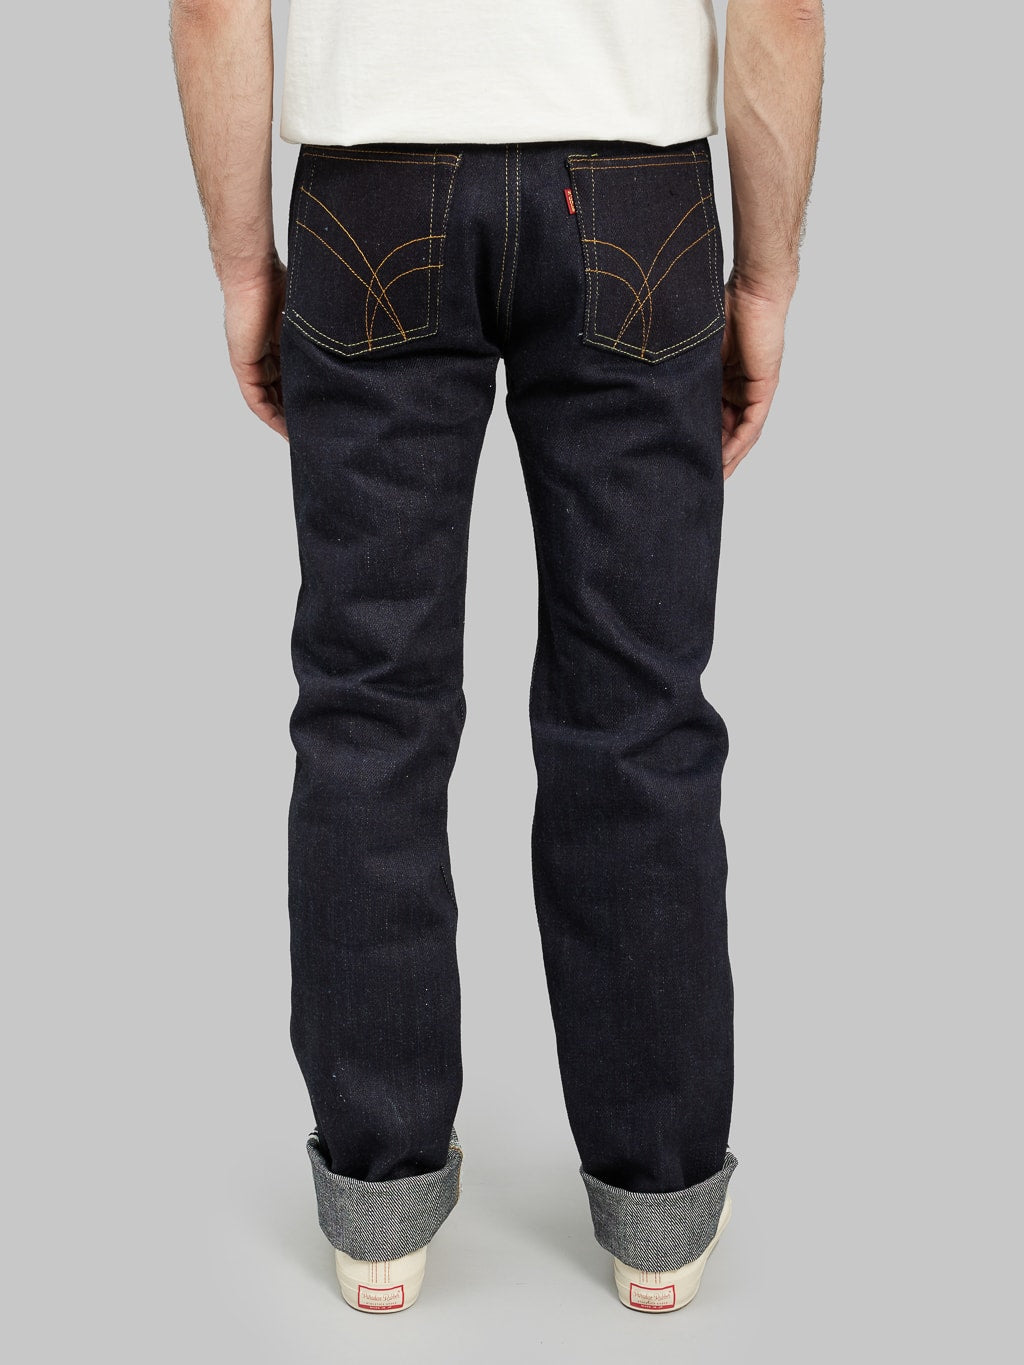 The Strike Gold Extra Heavyweight regular straight jeans back view